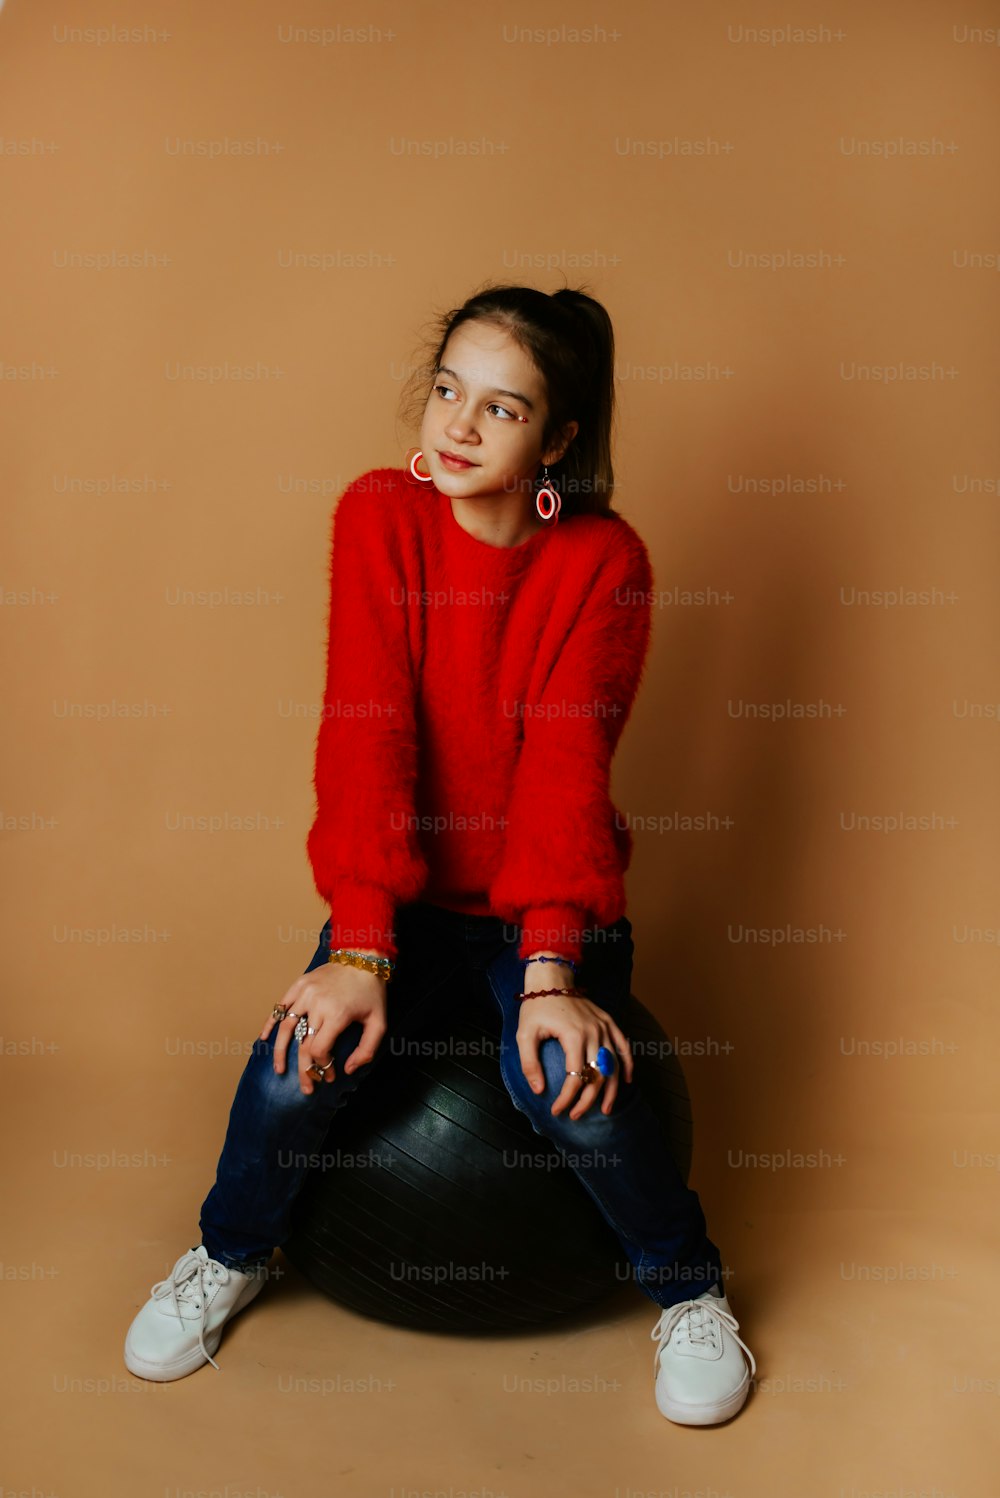 a woman in a red sweater is sitting on a black ball